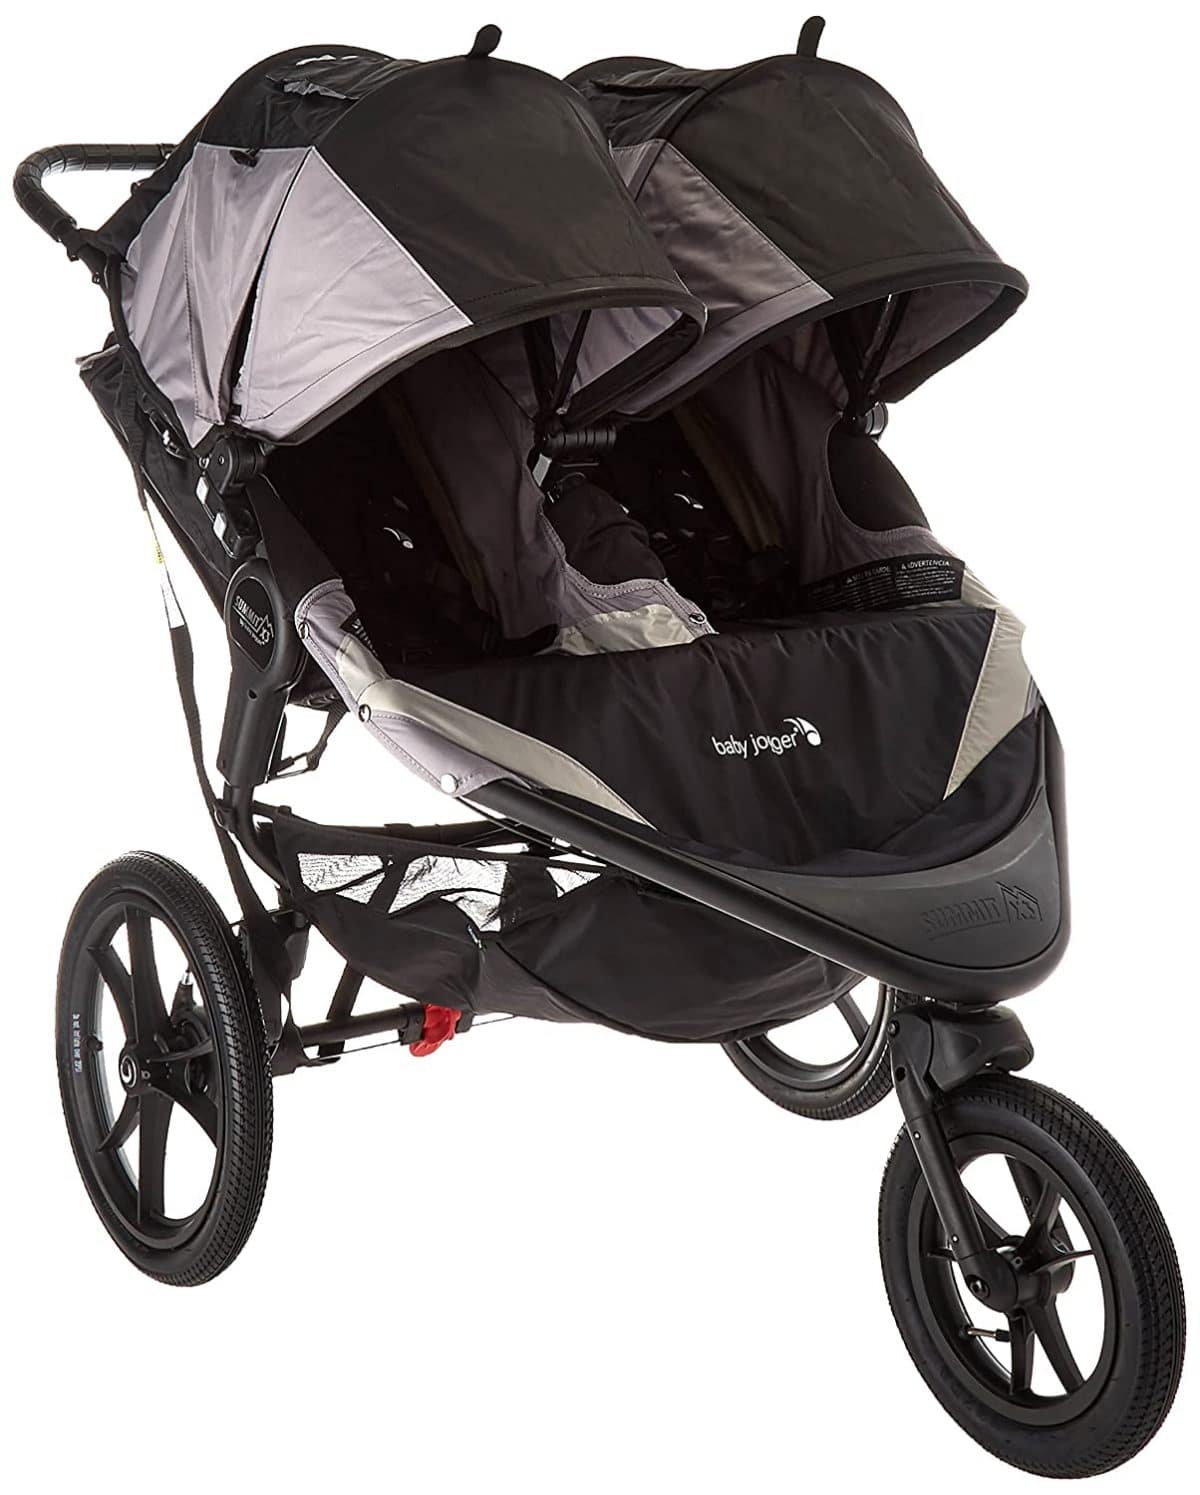 baby trend navigator double jogger stroller replacement parts